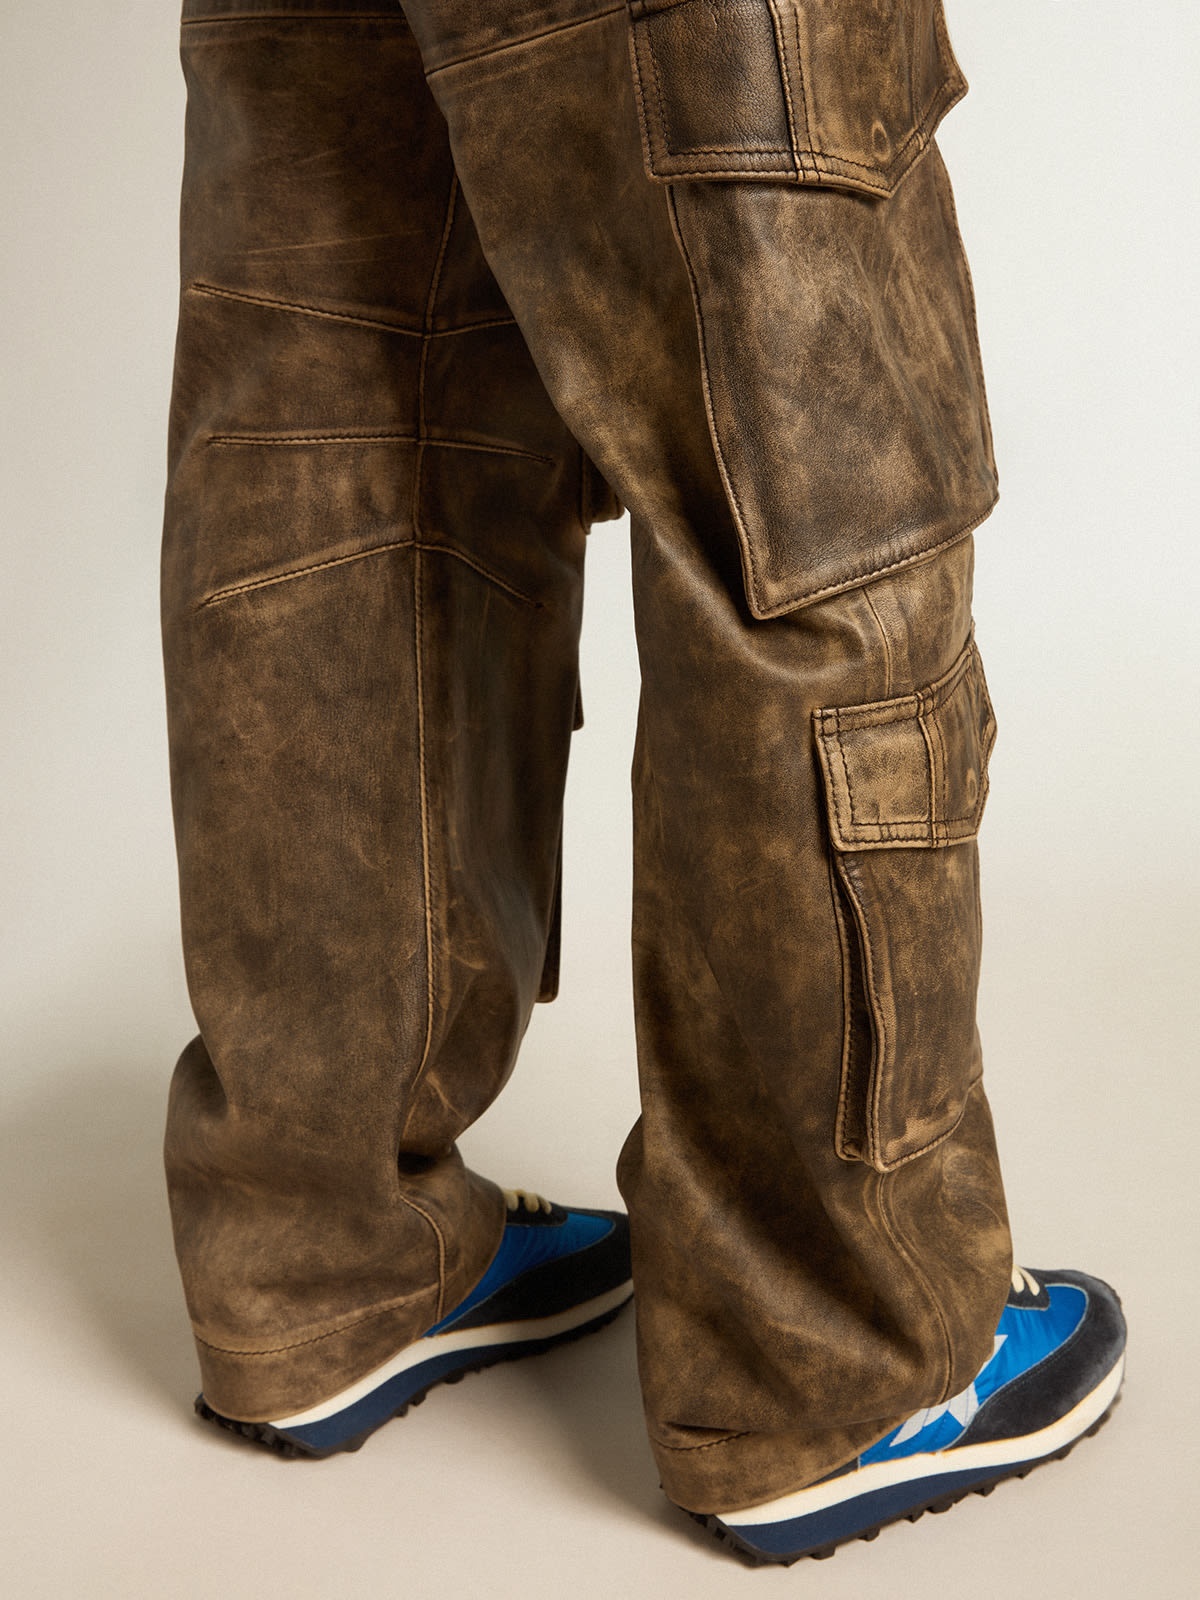 Women's aged brown nappa leather cargo pants - 5